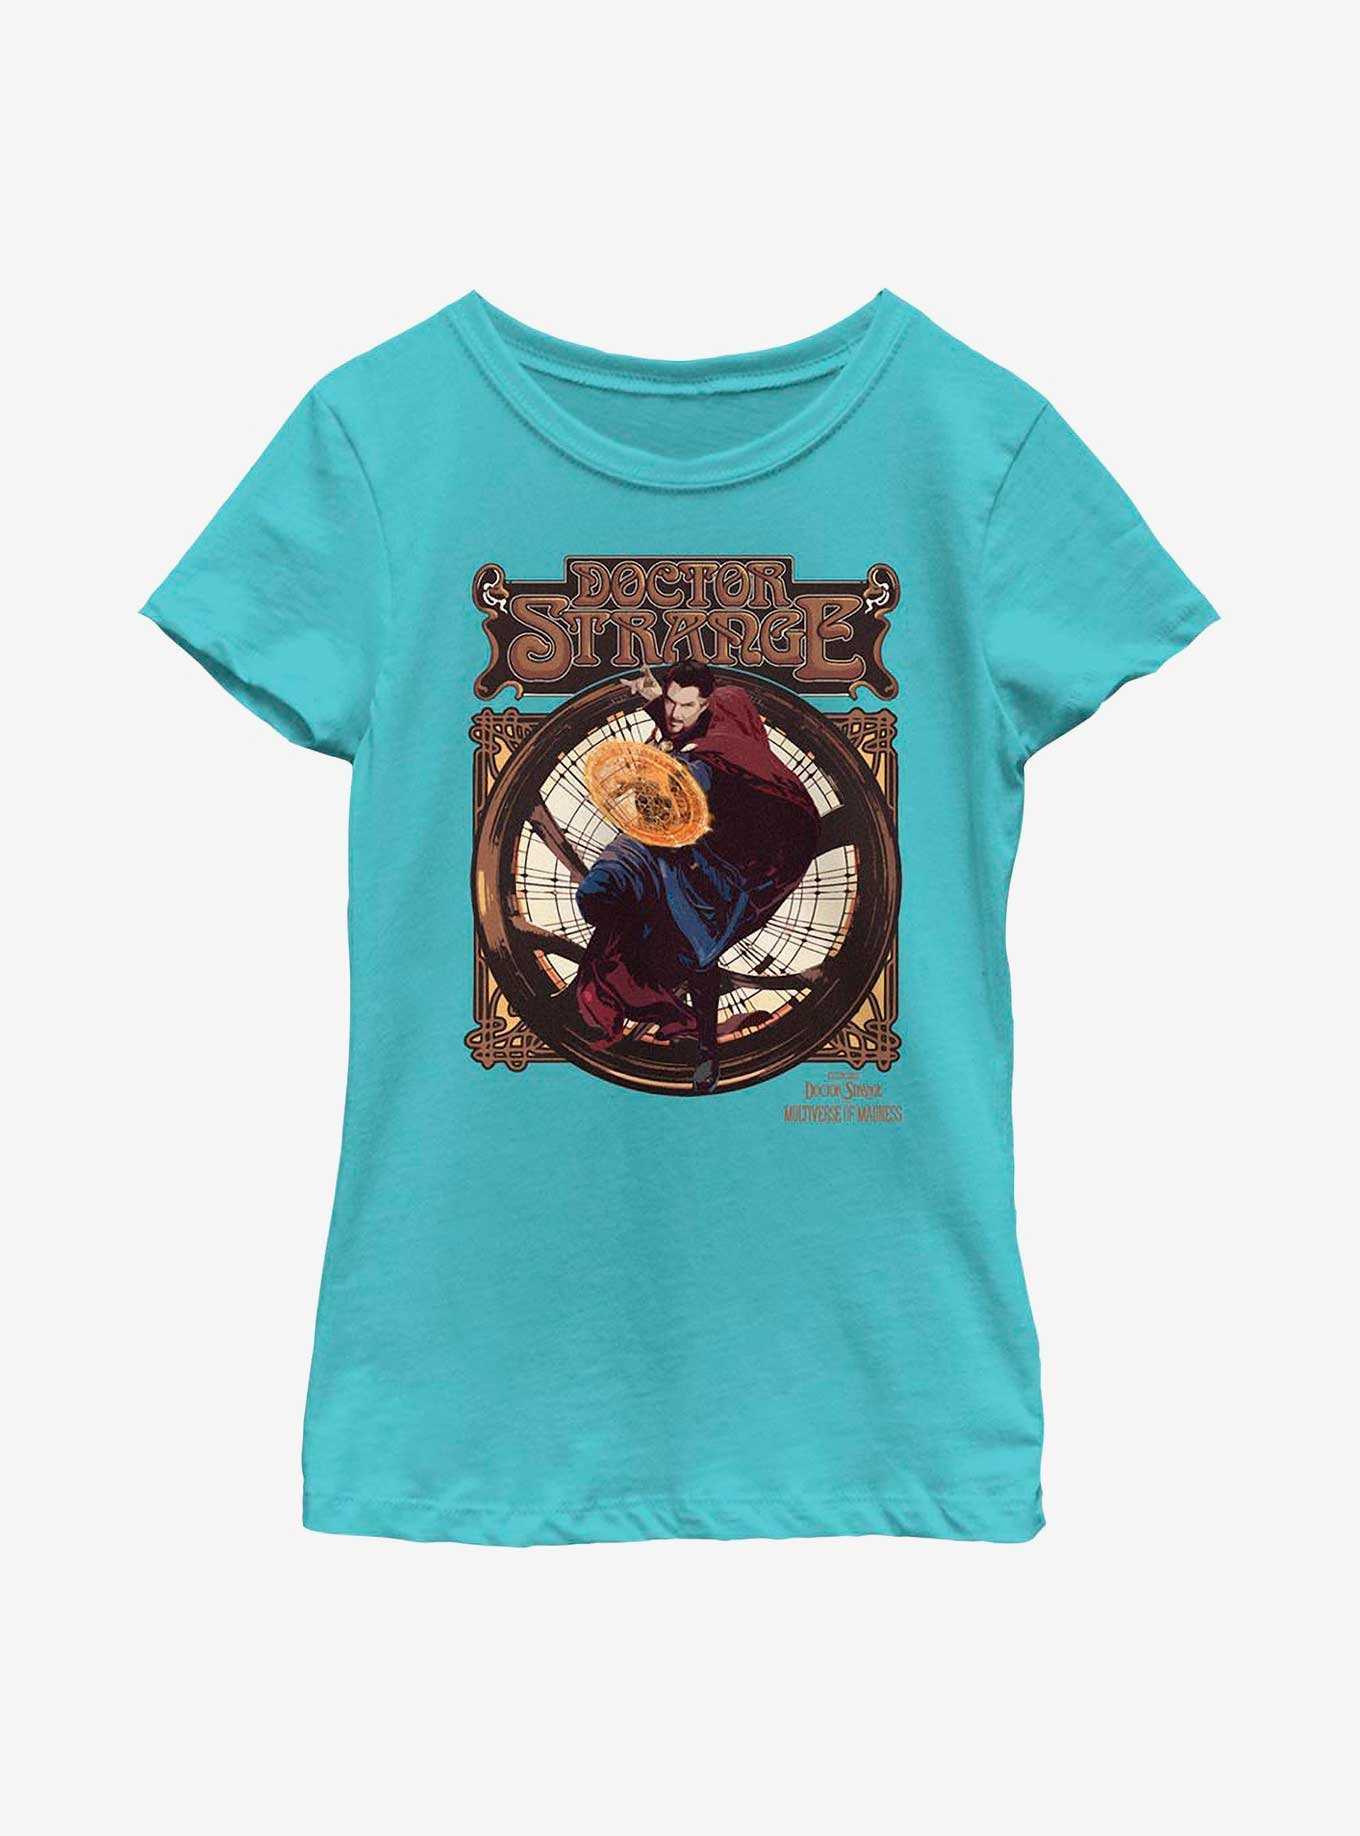 Marvel Doctor Strange In The Multiverse Of Madness Retro Seal Youth Girls T-Shirt, , hi-res